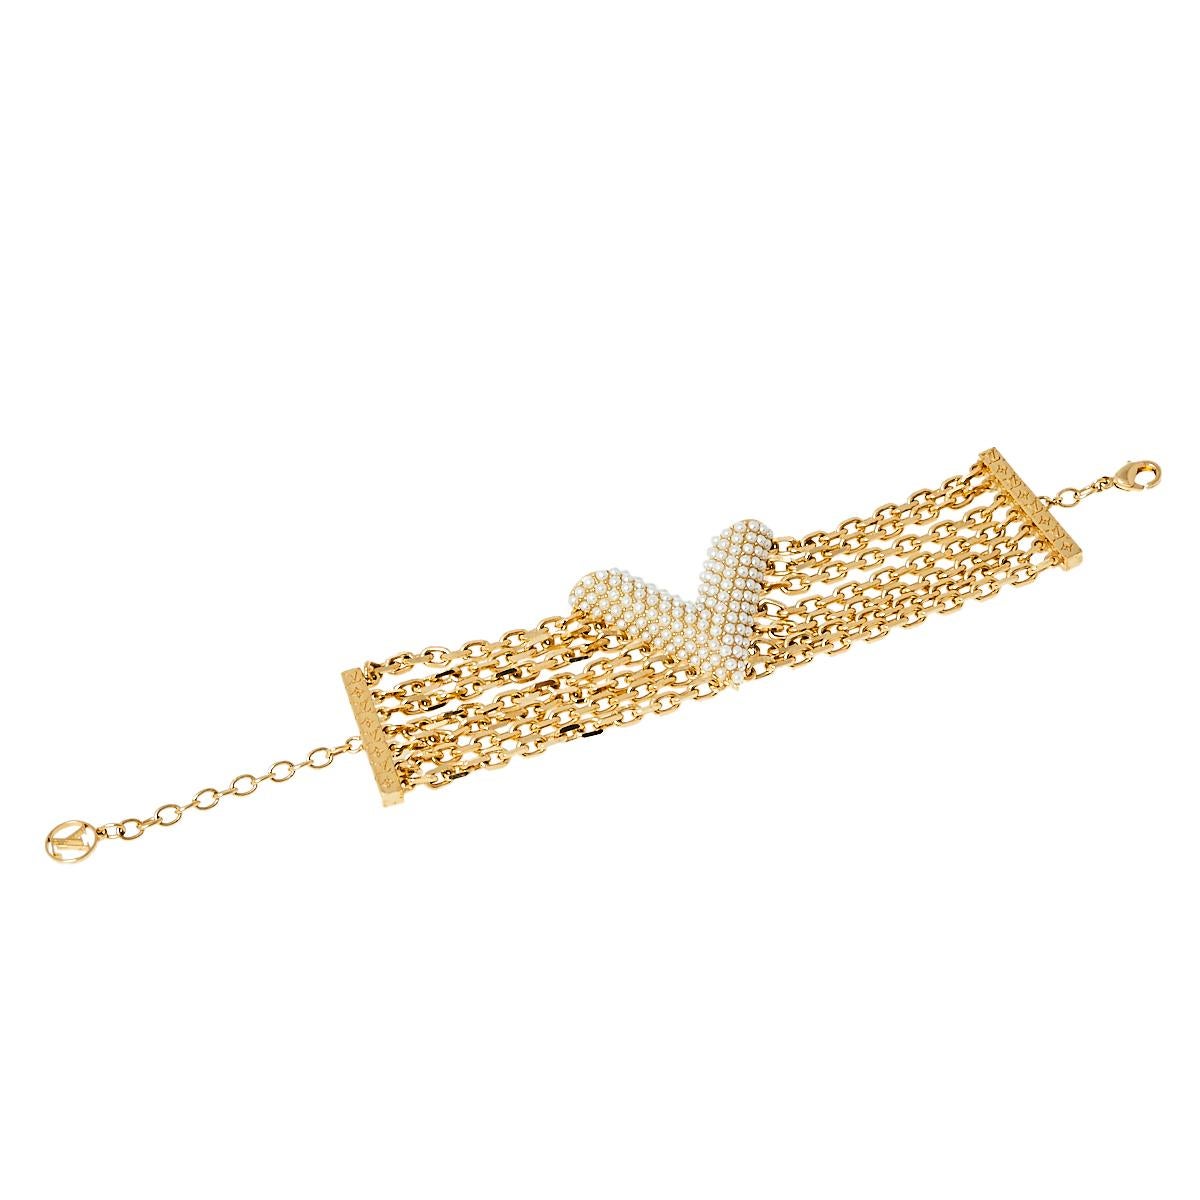 Create an elegant, timeless, and classic addition to both casual and even special events with this beautiful Louis Vuitton Essential V Perle bracelet. Constructed in gold-tone metal, this bracelet features a large V motif in the center detailed with